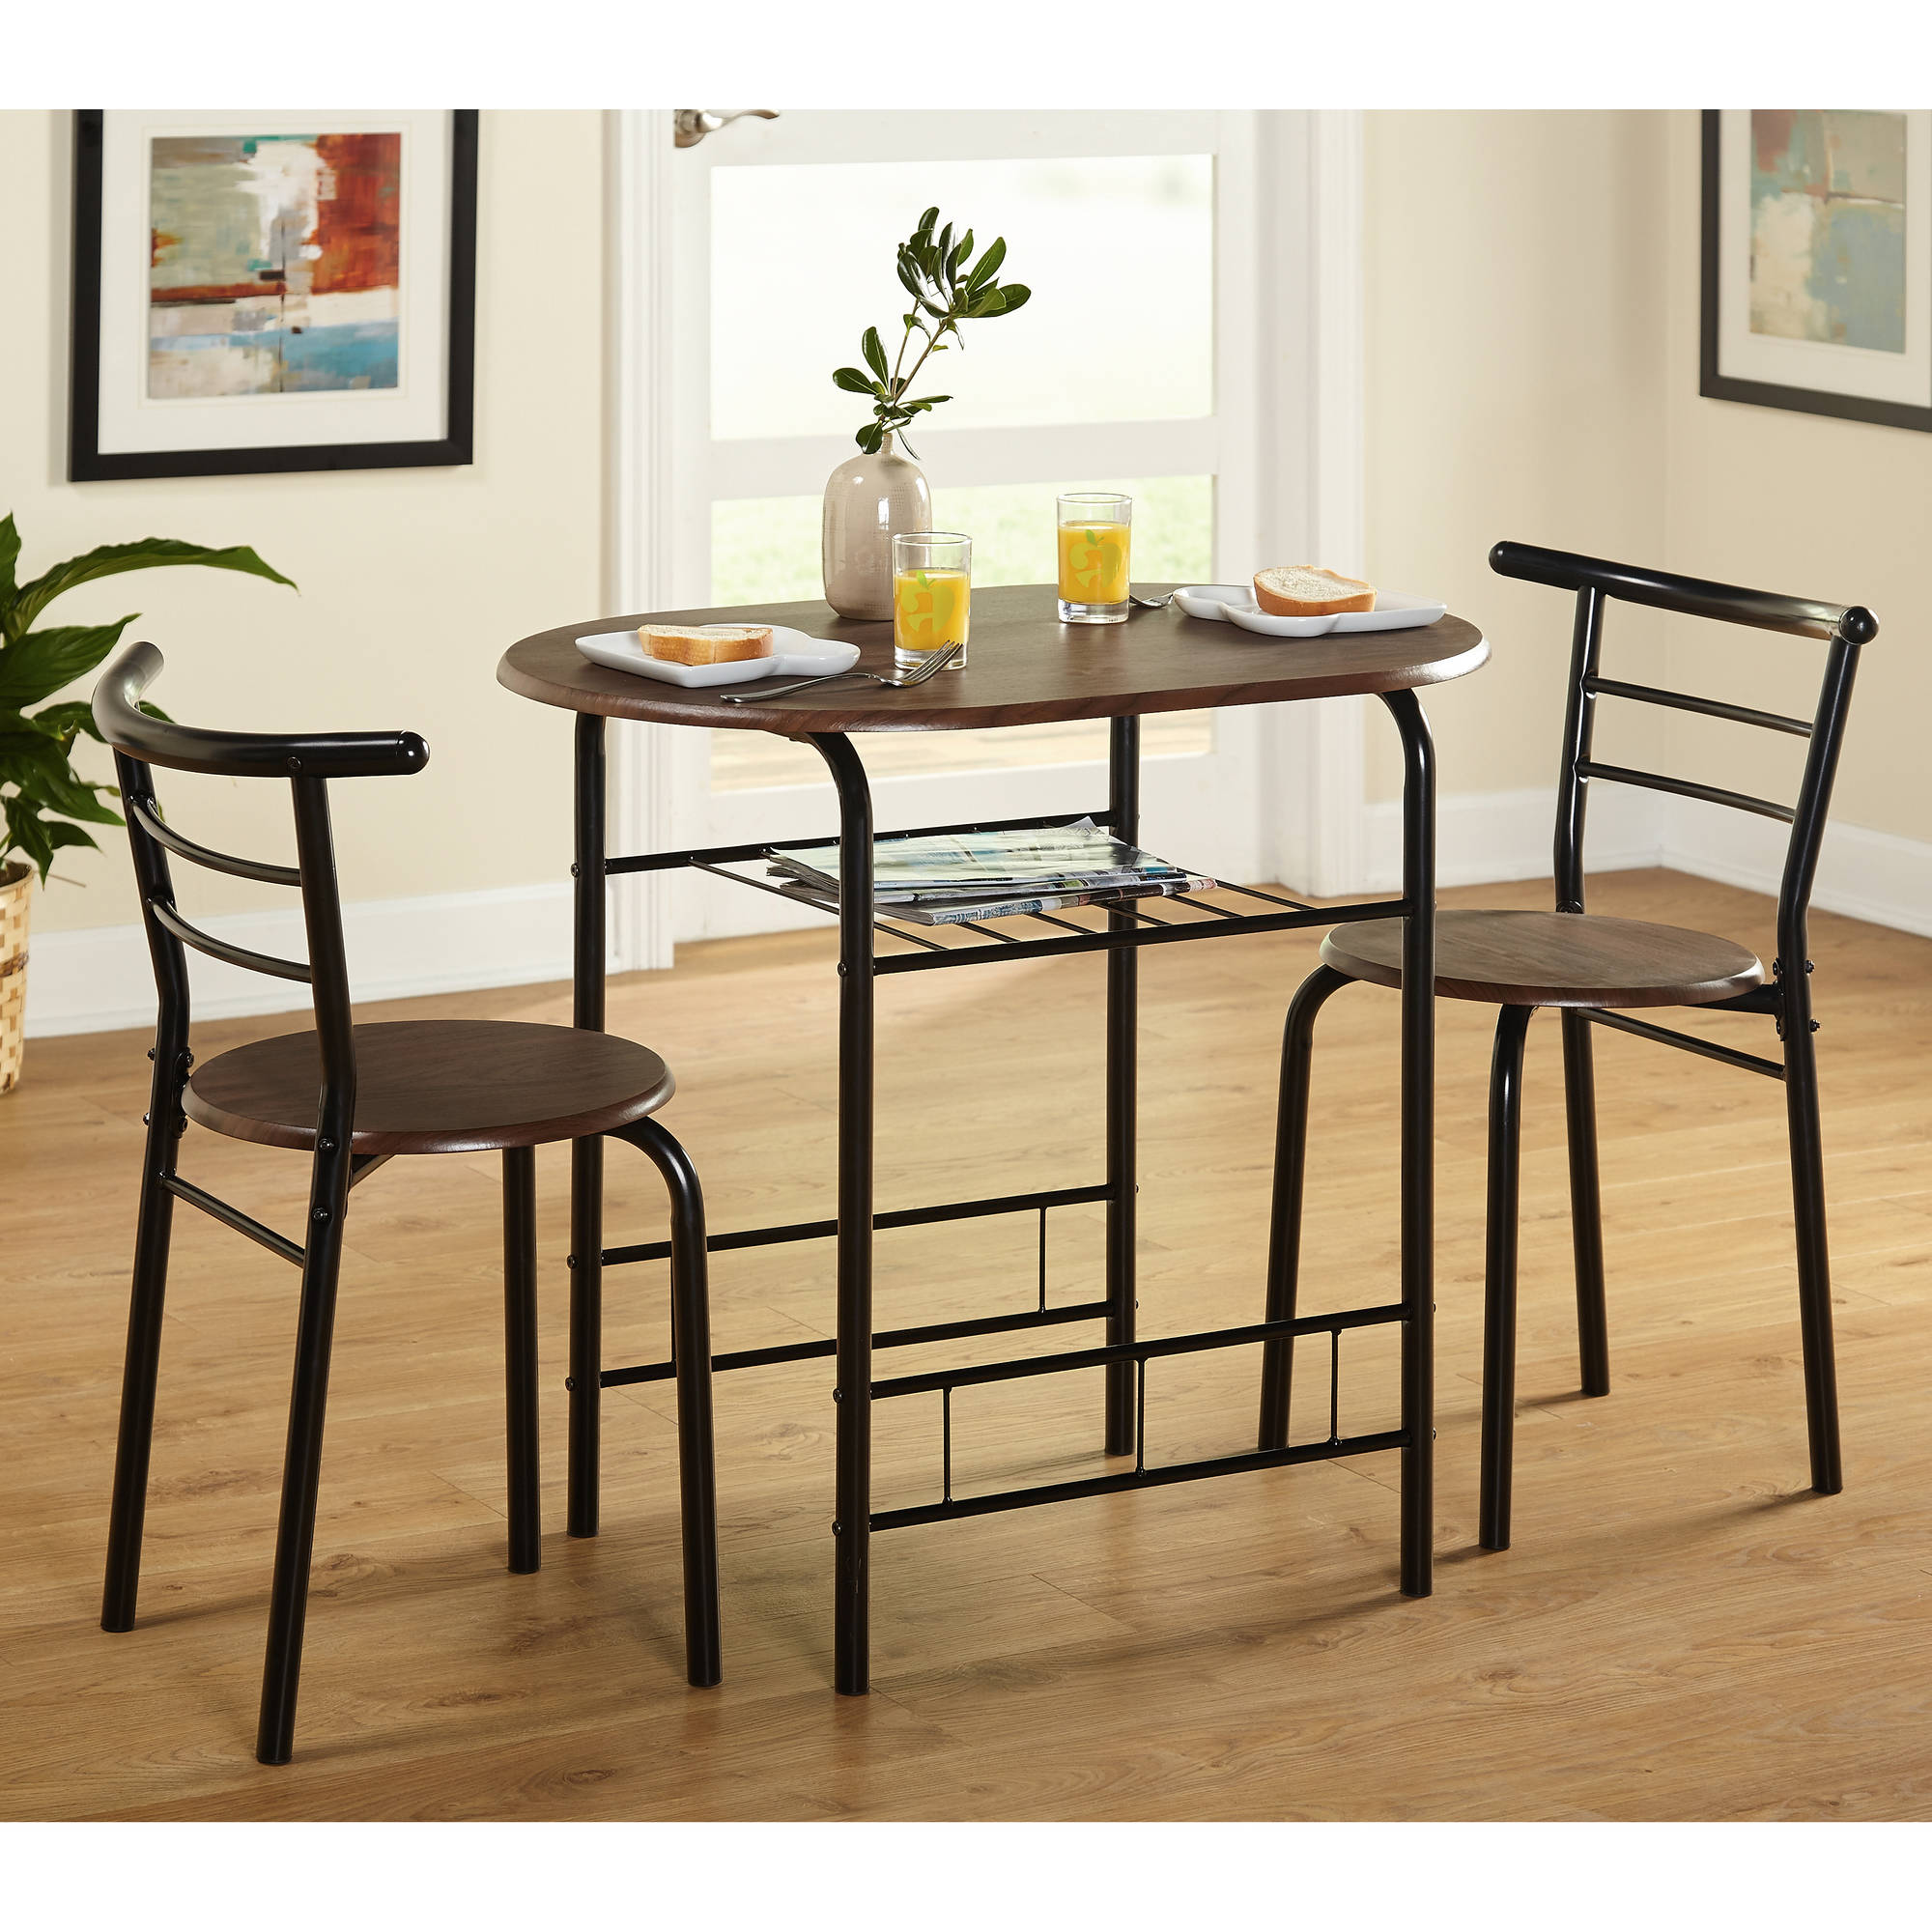 Target Marketing Systems 3 - Piece Bistro Dining Set - image 2 of 5